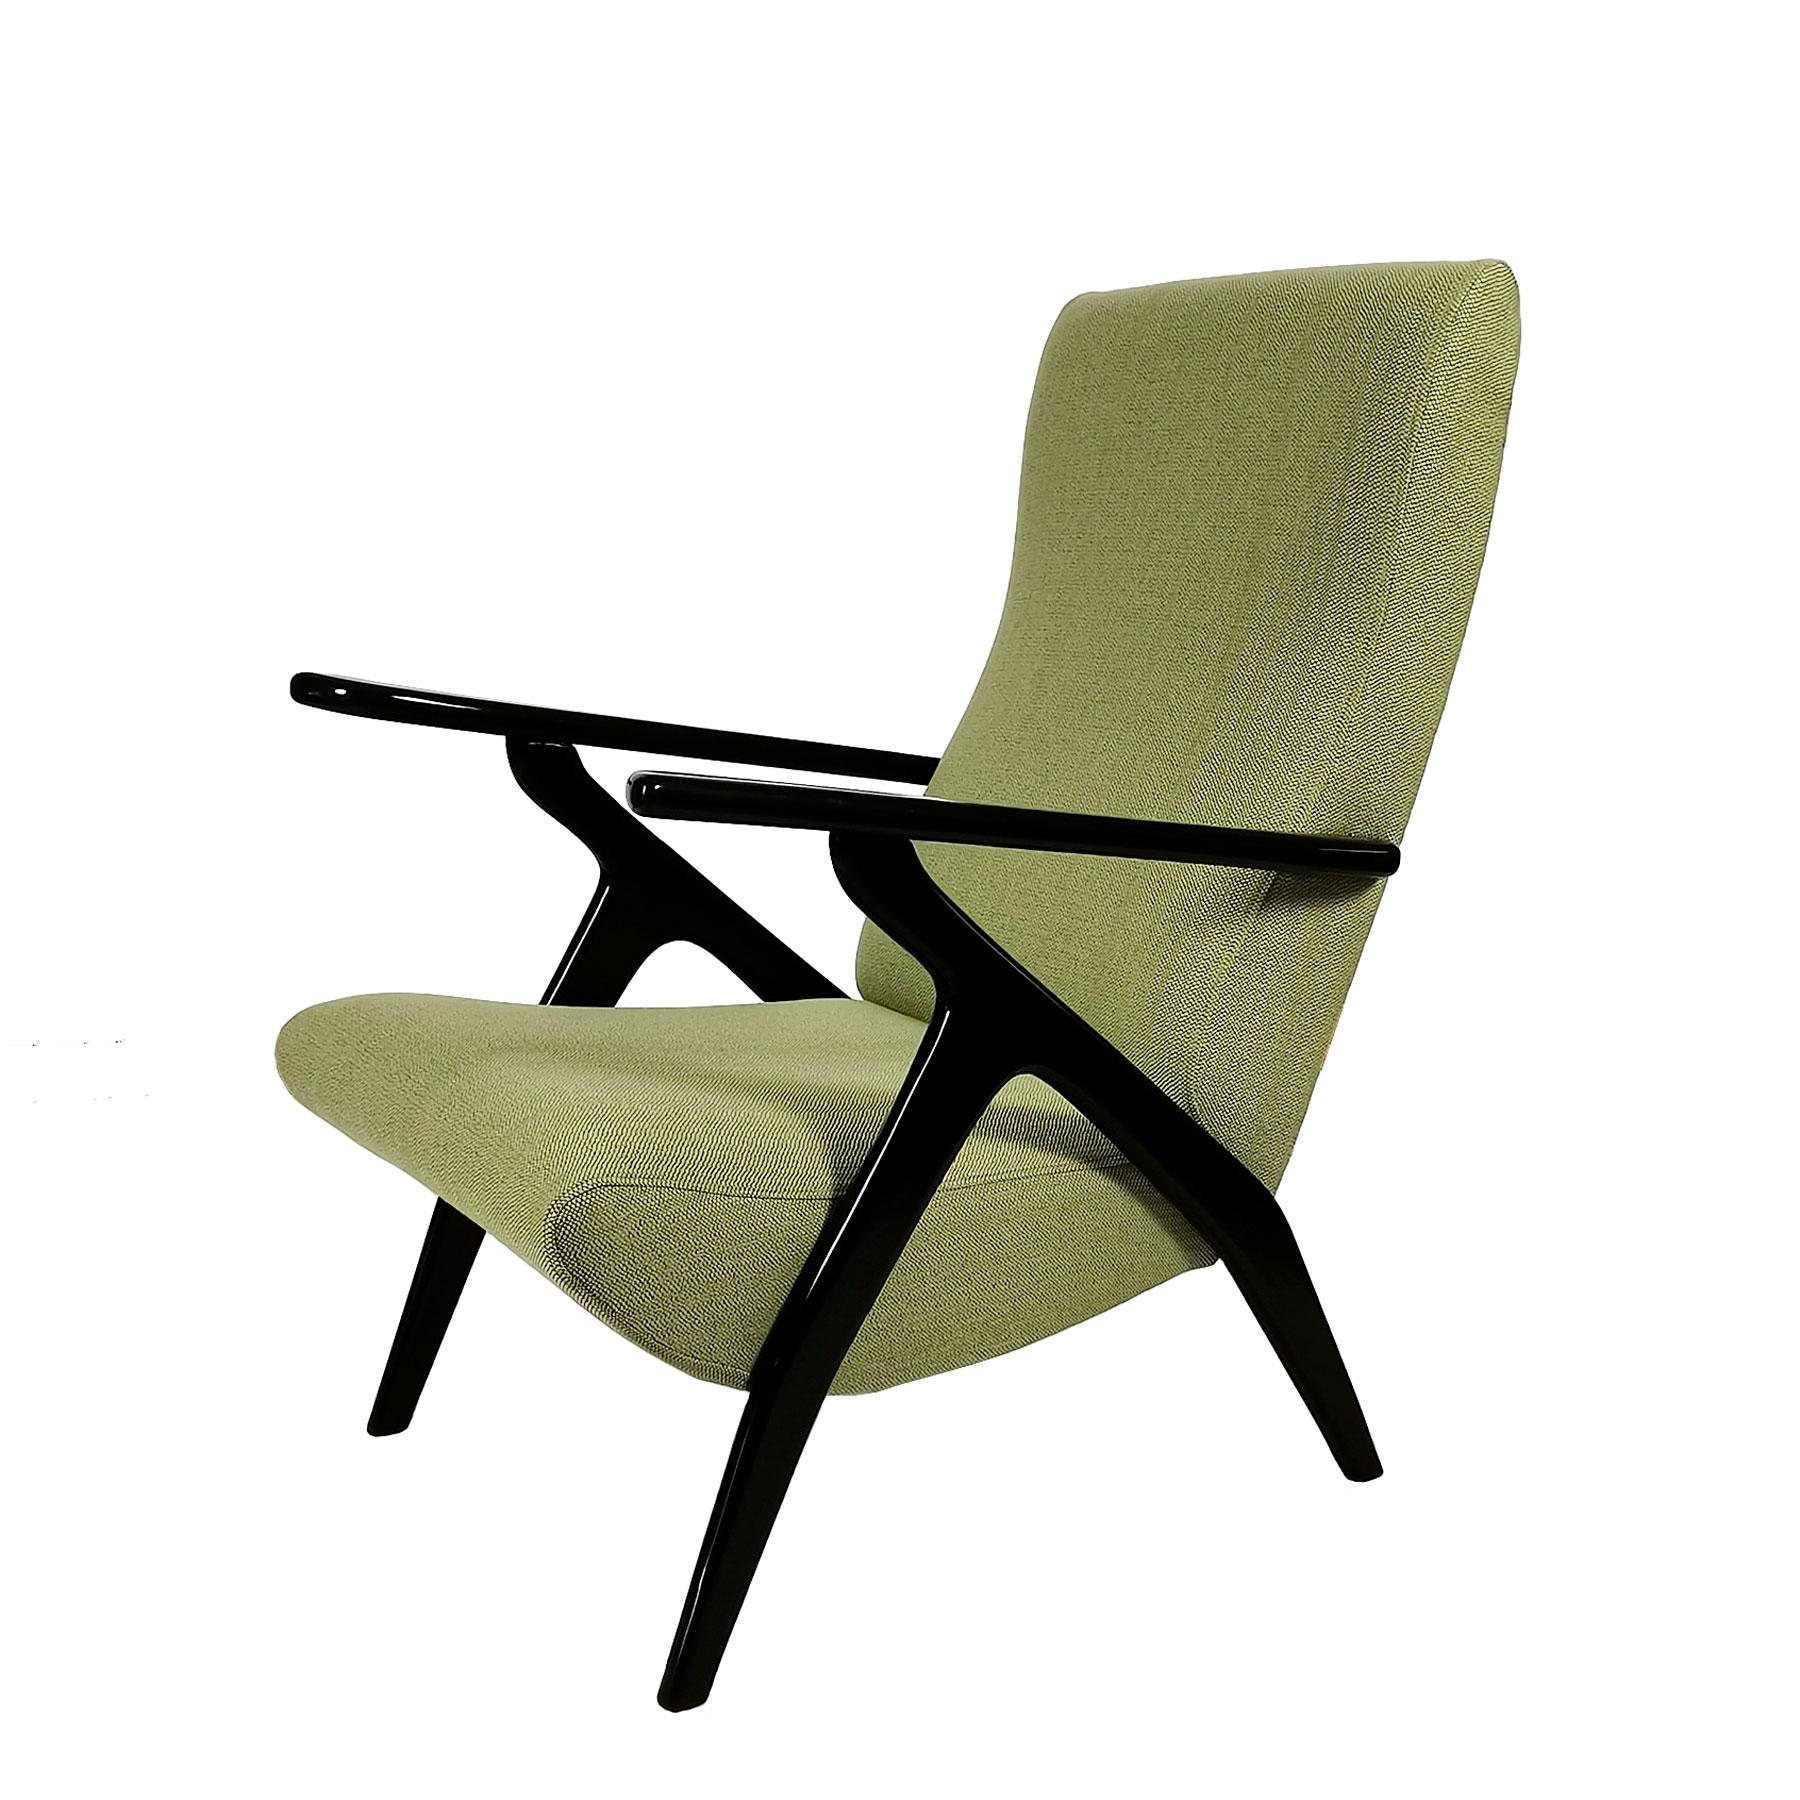 Italian Pair of Mid-Century Modern Armchairs, Beech Wood and Green Flecked Fabric- Italy For Sale